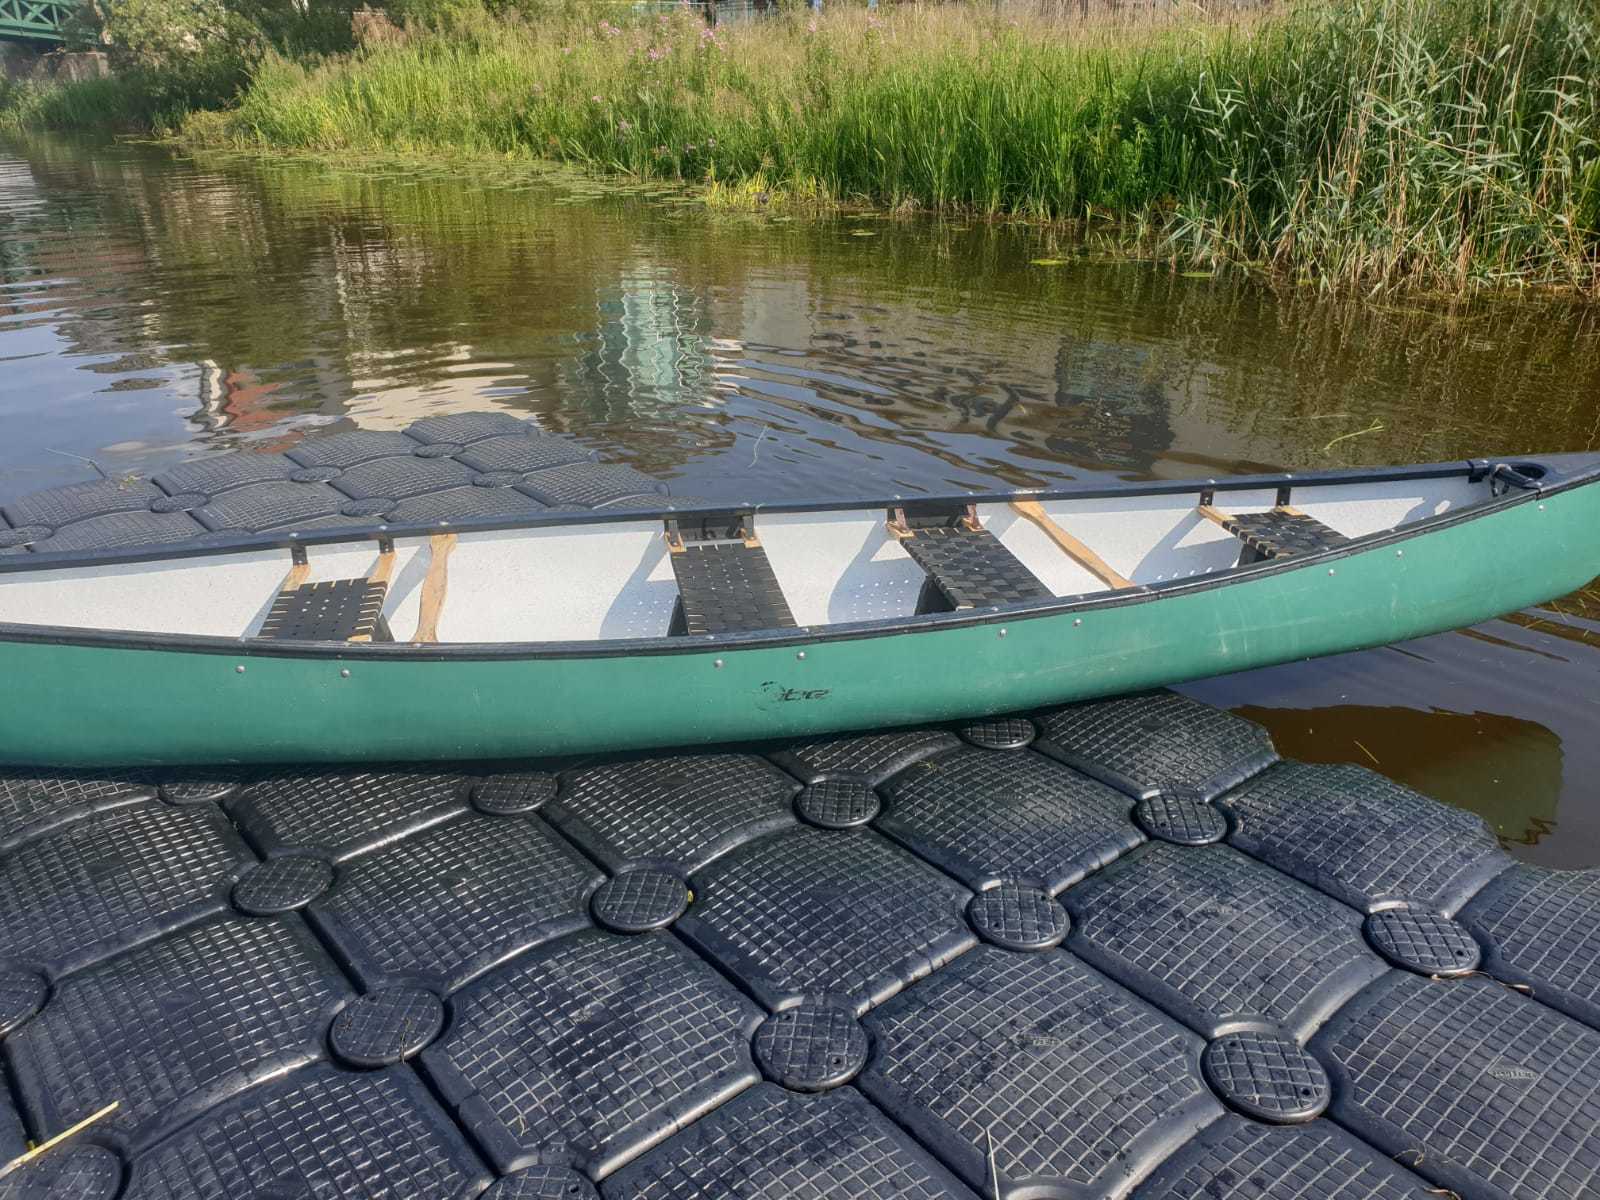 Fermanagh activity provider 'devastated' after canoes stolen